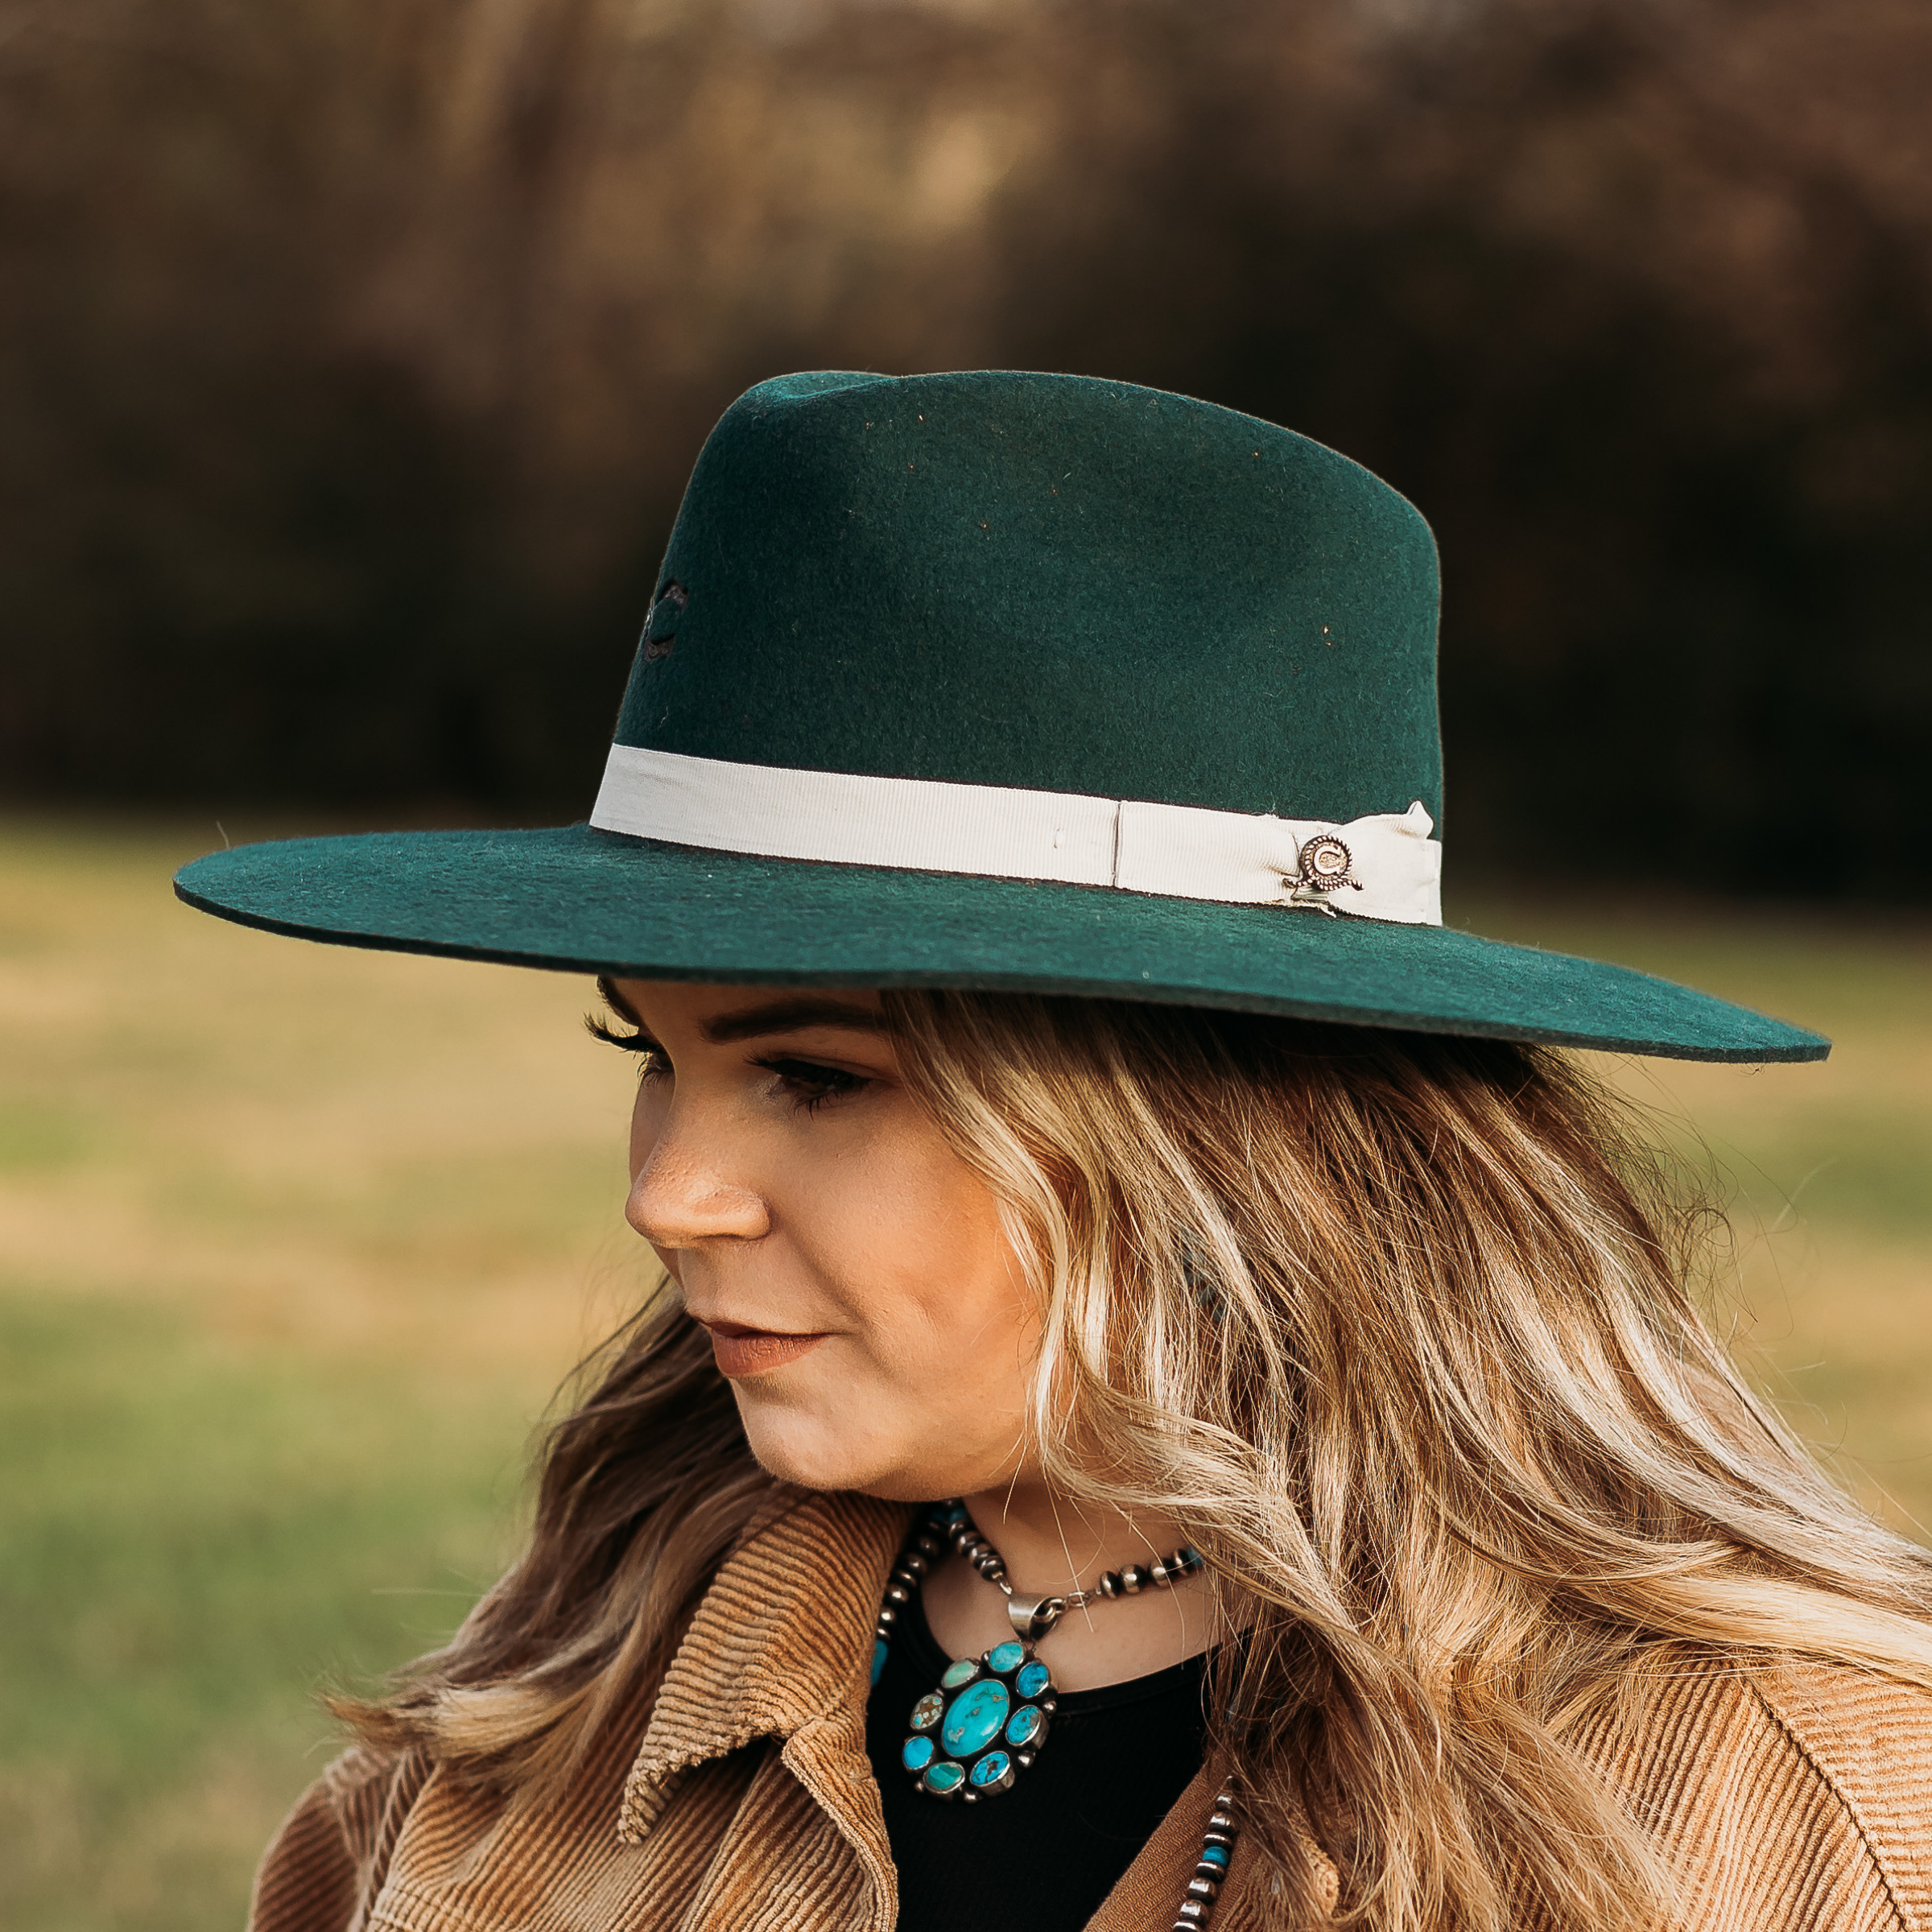 Forest Green Felt hat with White Hat Band and Charlie 1 Horse Pin. Model has it paired with a brown jacket and turquoise jewelry. Pictured on wooded background